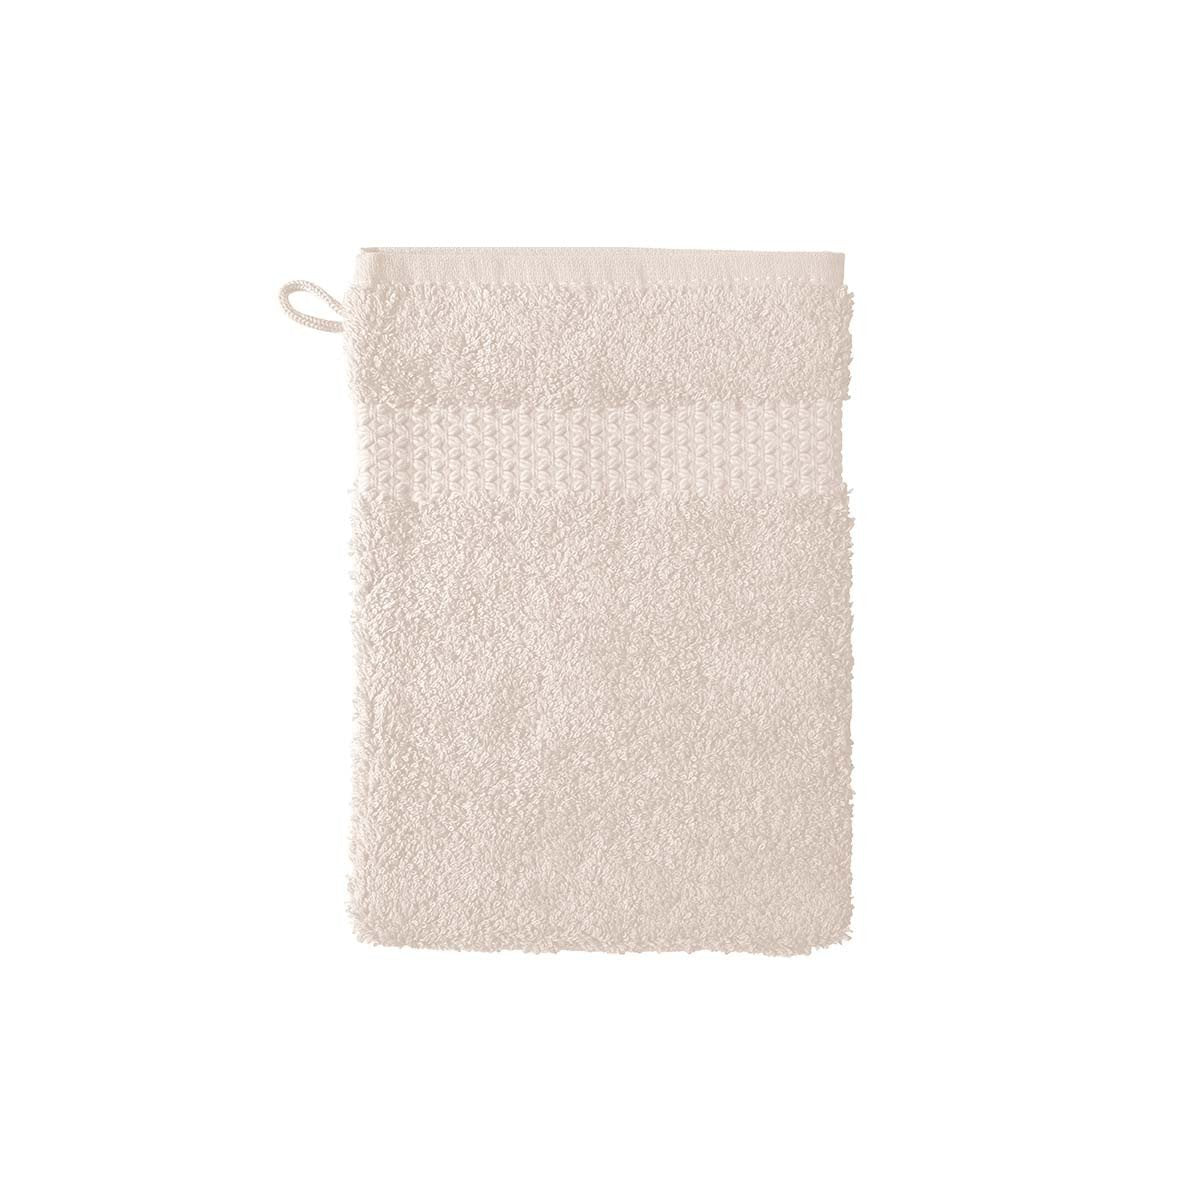 Etoile Nacre Bath Collection by Yves Delorme | Fig Linens - Ivory bath linen, wash mitt